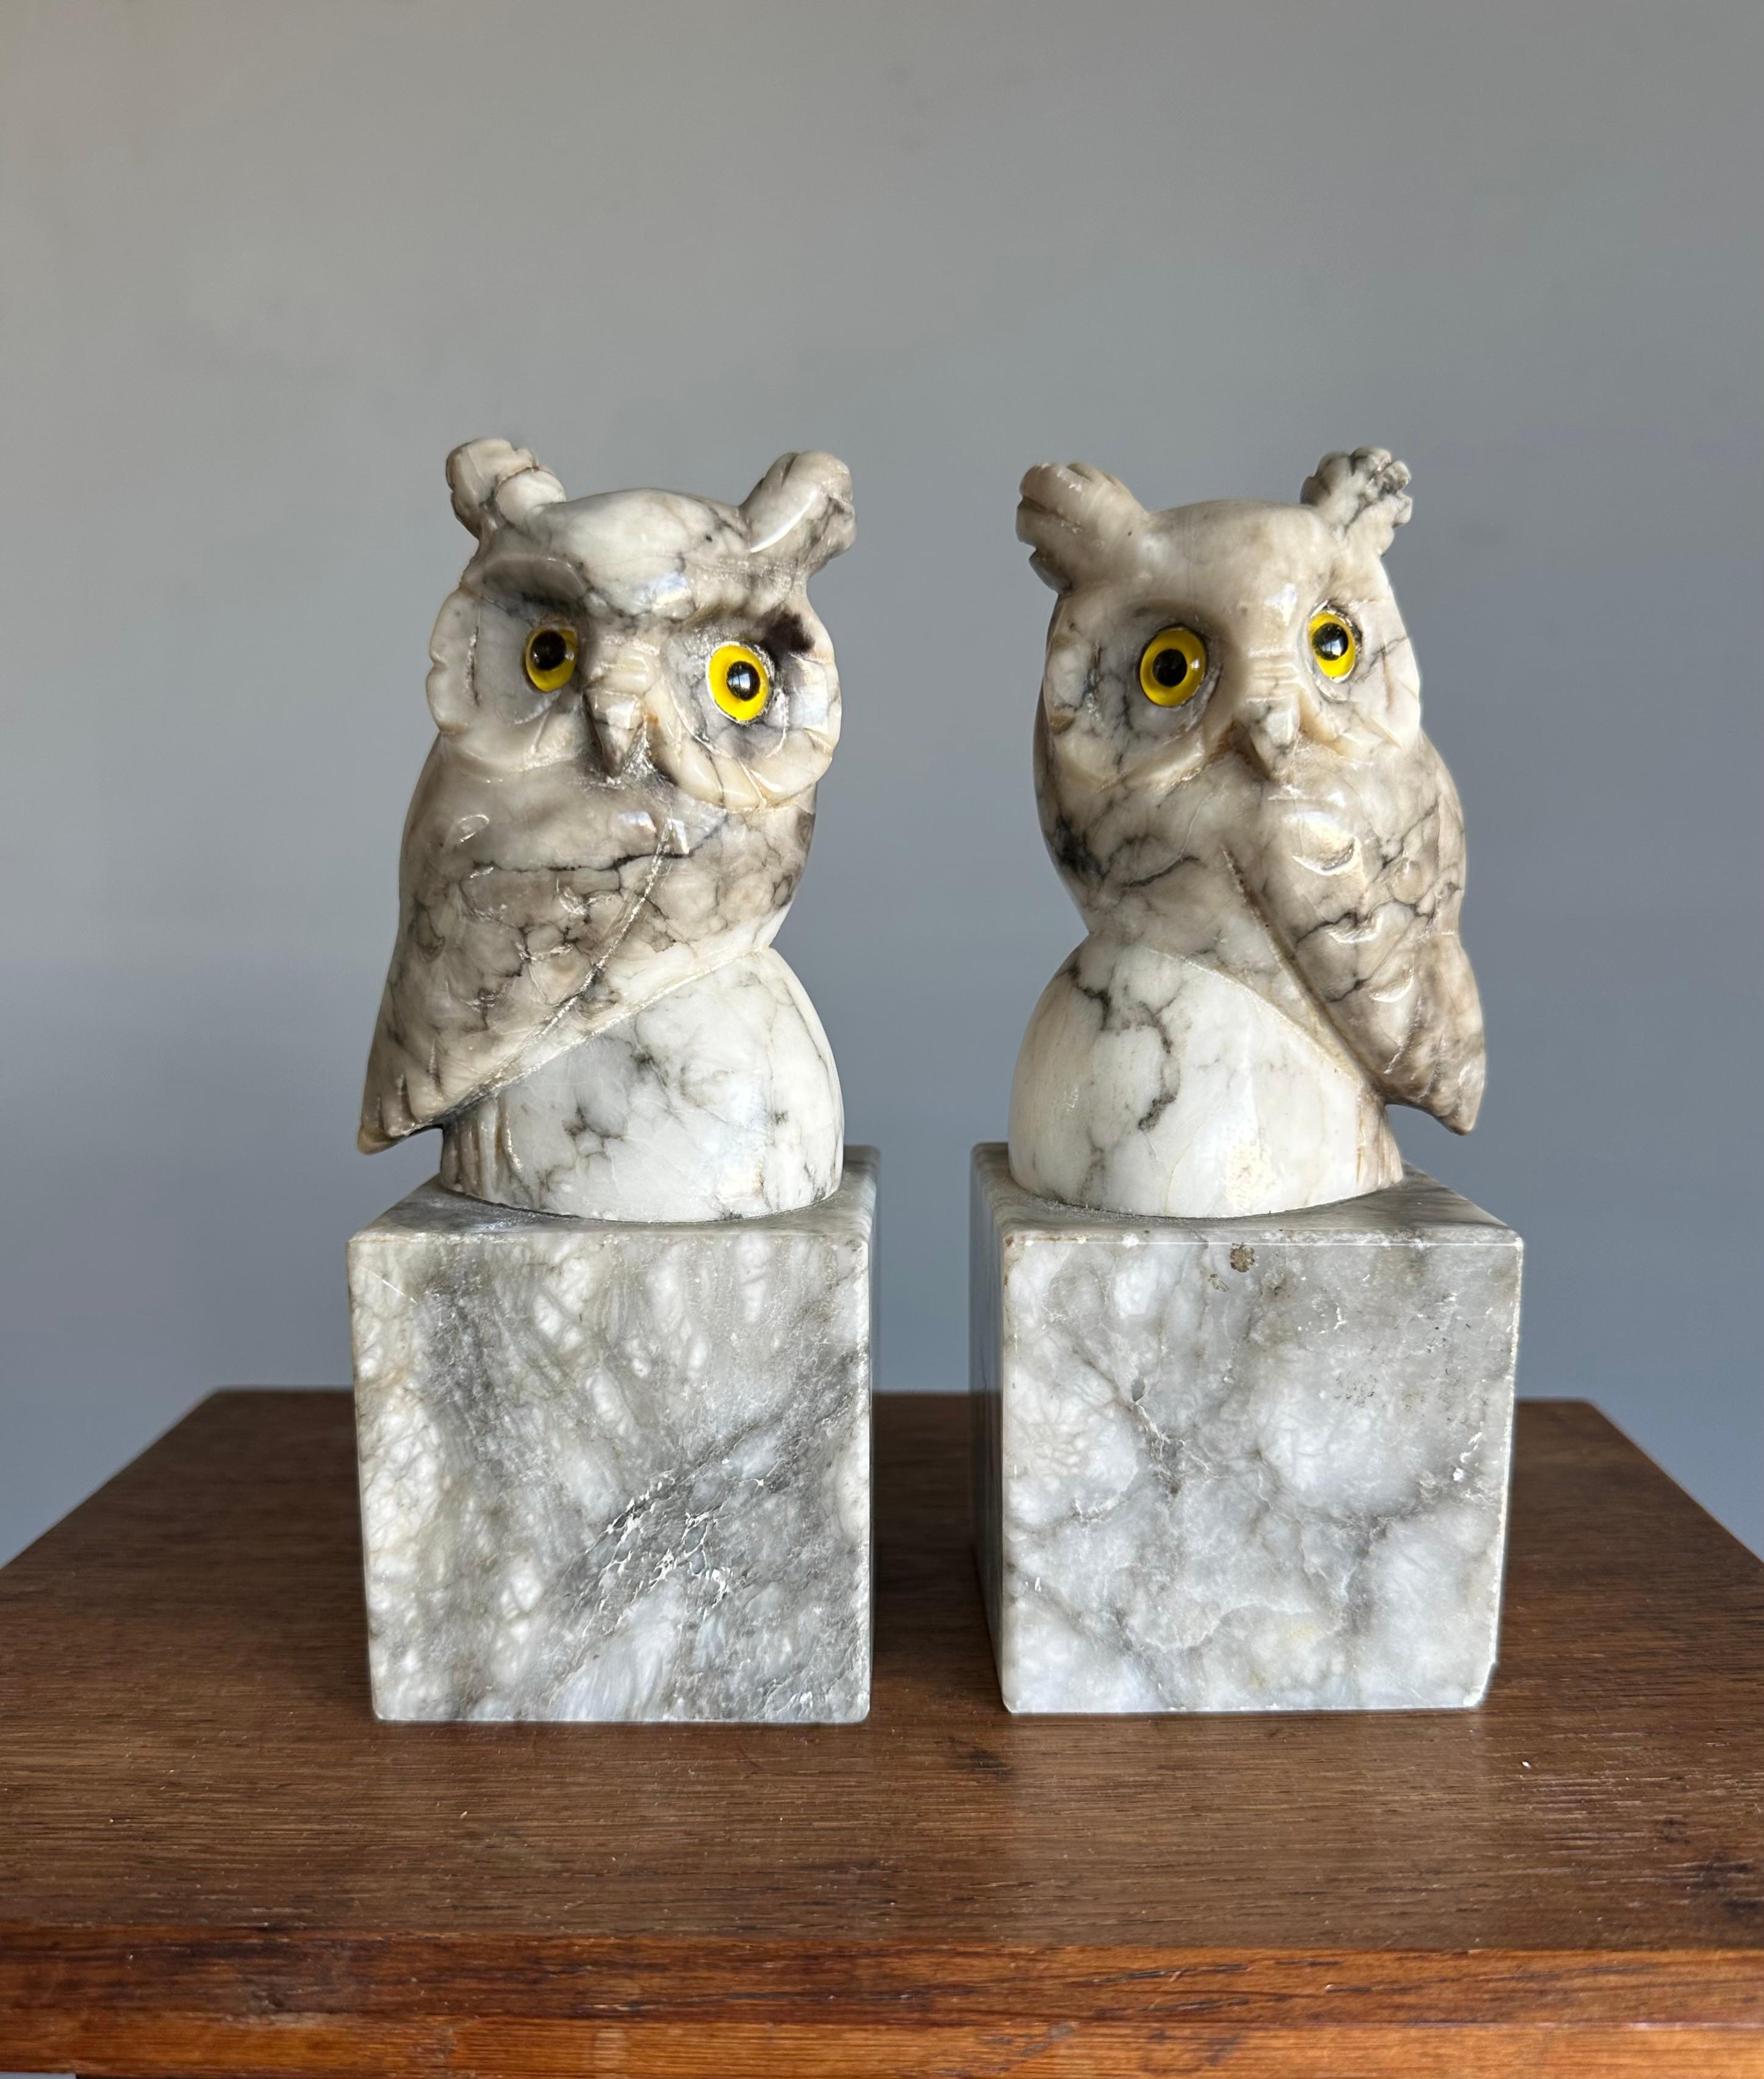 European Mid-Century Hand Carved Alabaster Owl Sculptures with Glass Eyes Bookends 1950s For Sale